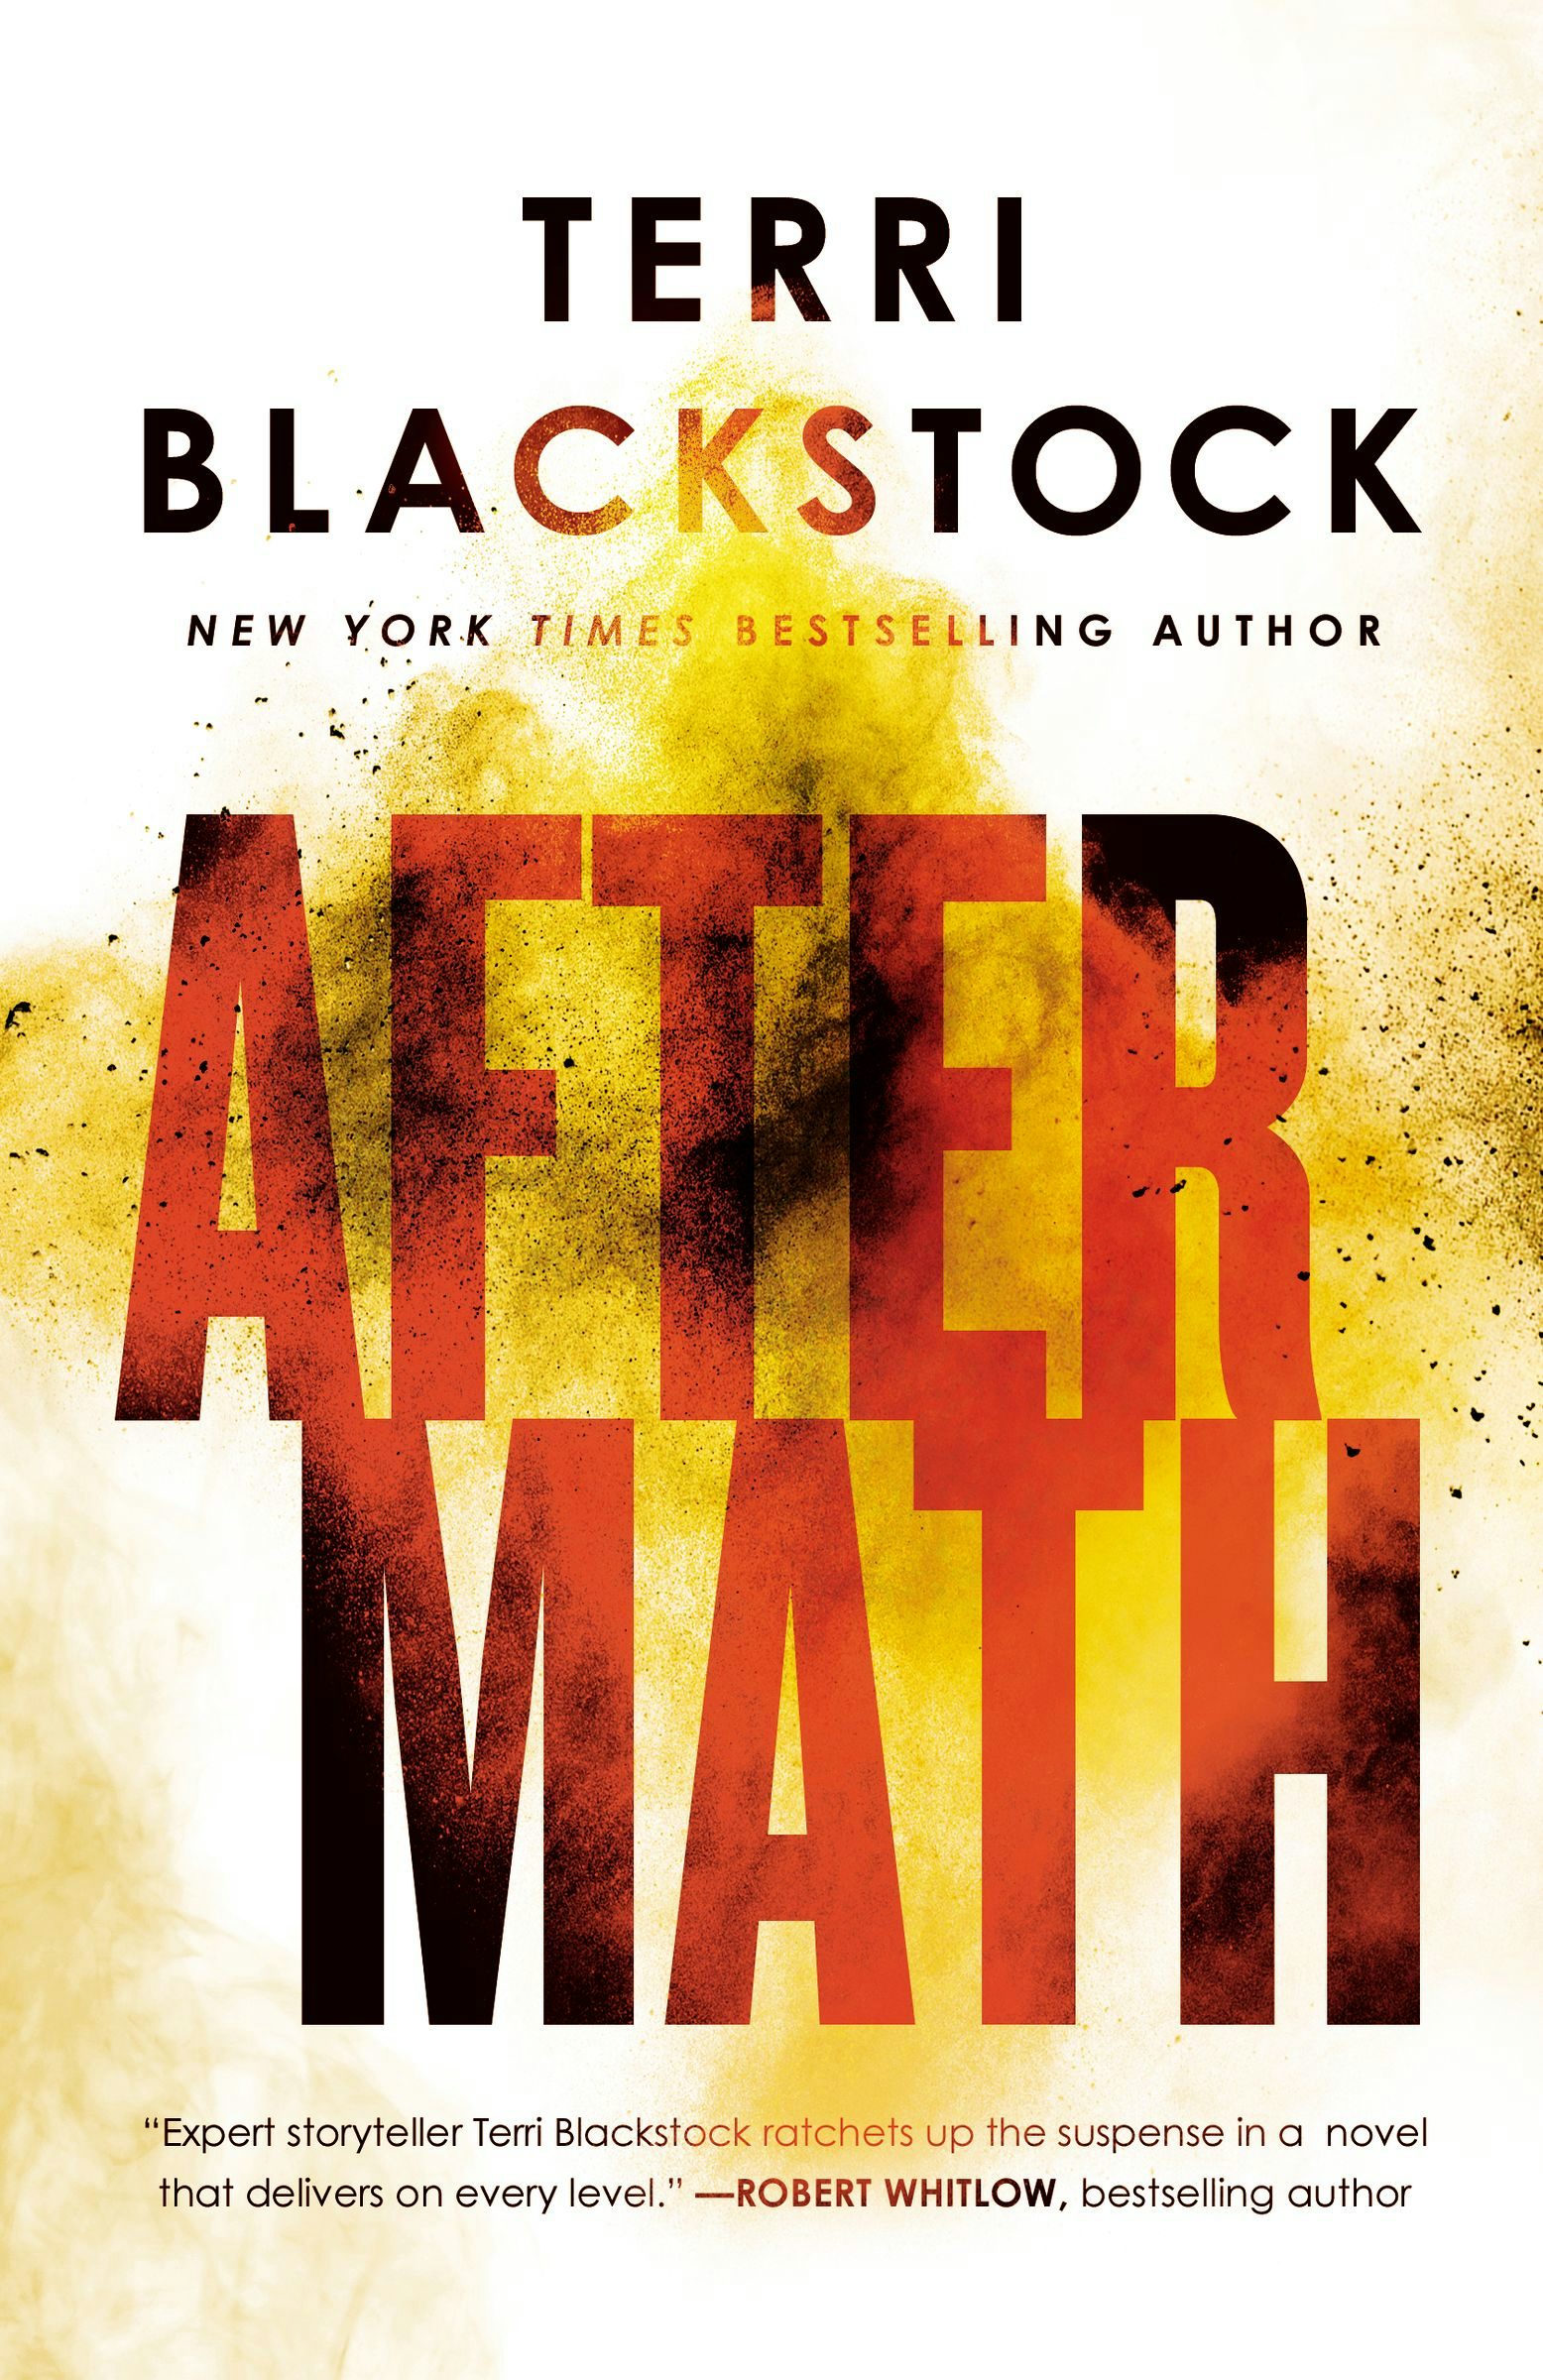 aftermath book series covers